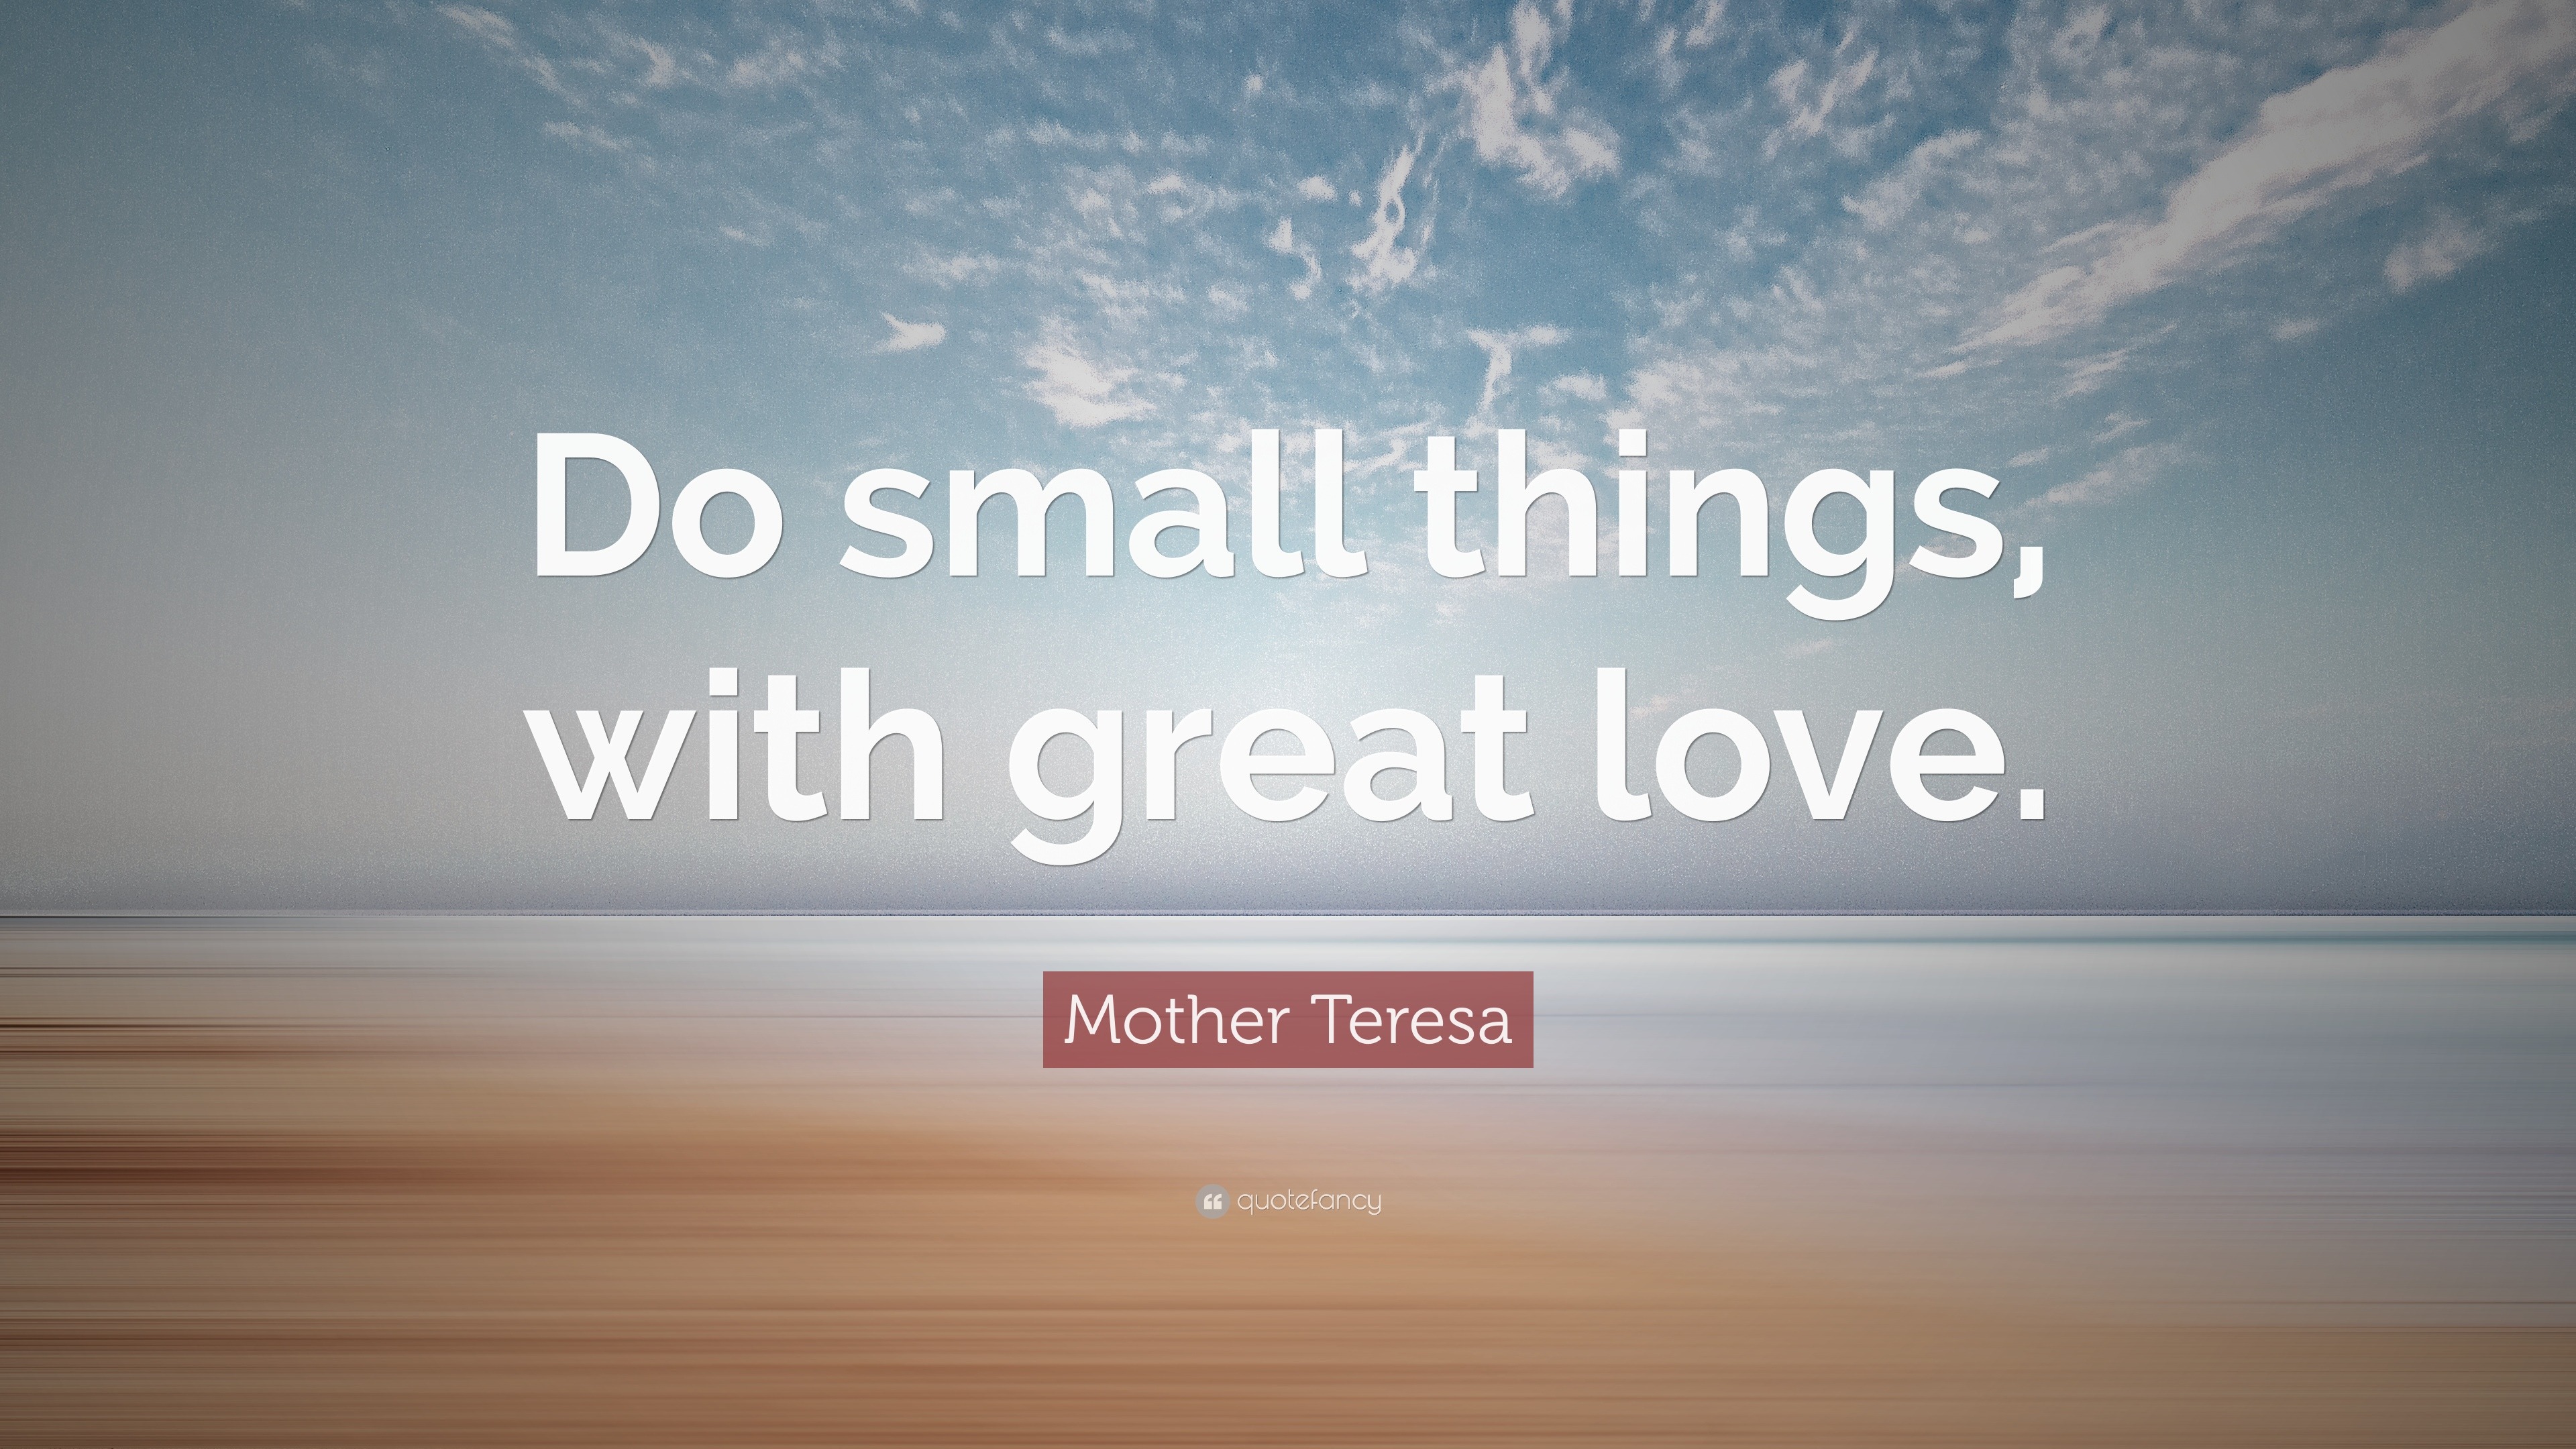 Mother Teresa Quote “do Small Things With Great Love”